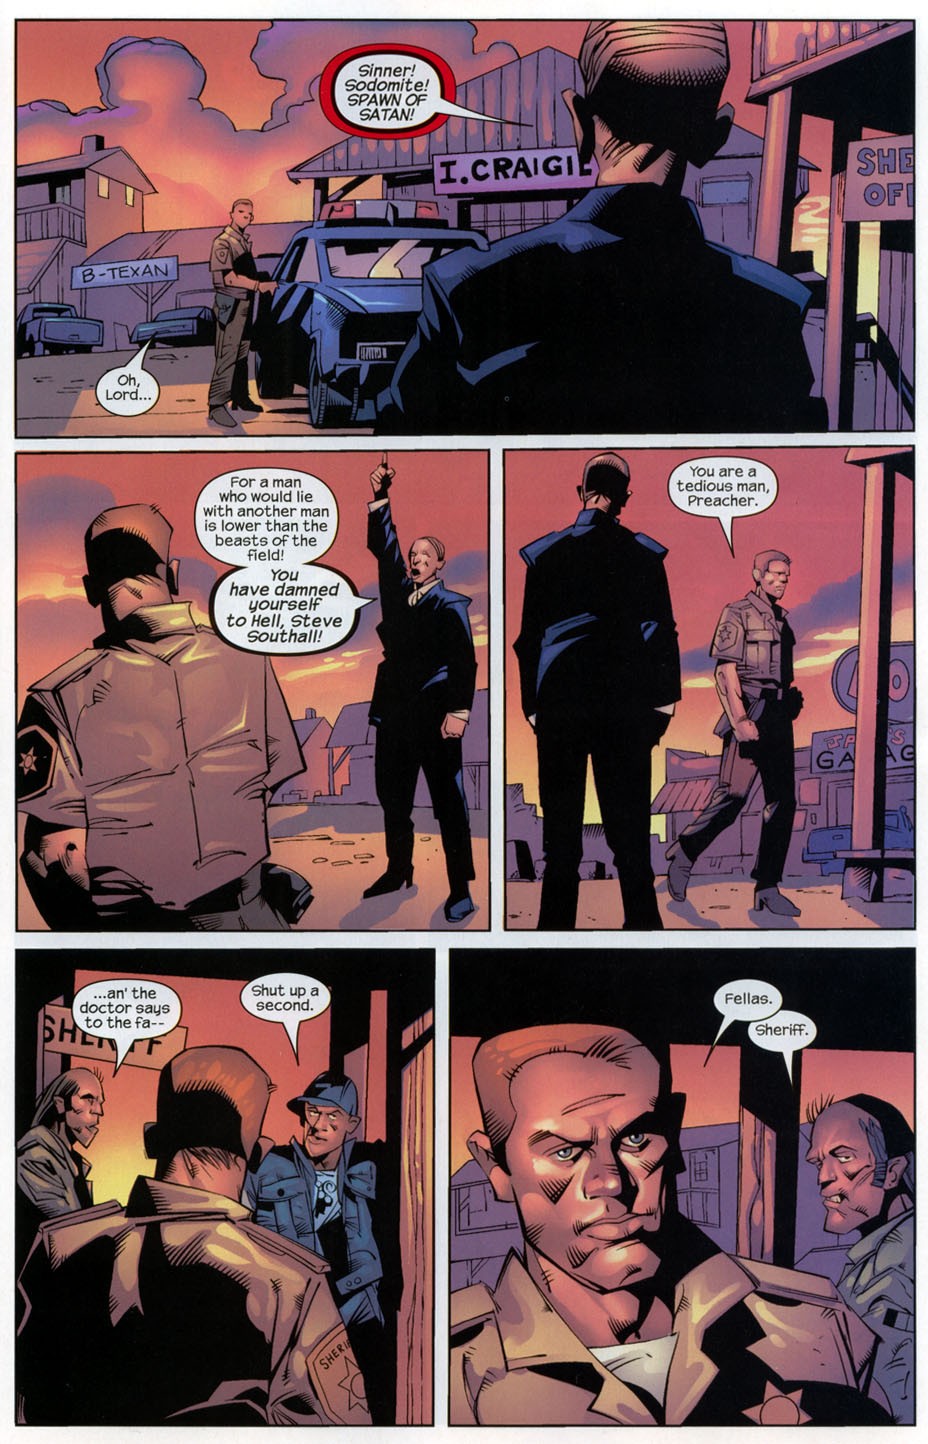 The Punisher (2001) issue 29 - Streets of Laredo #02 - Page 18